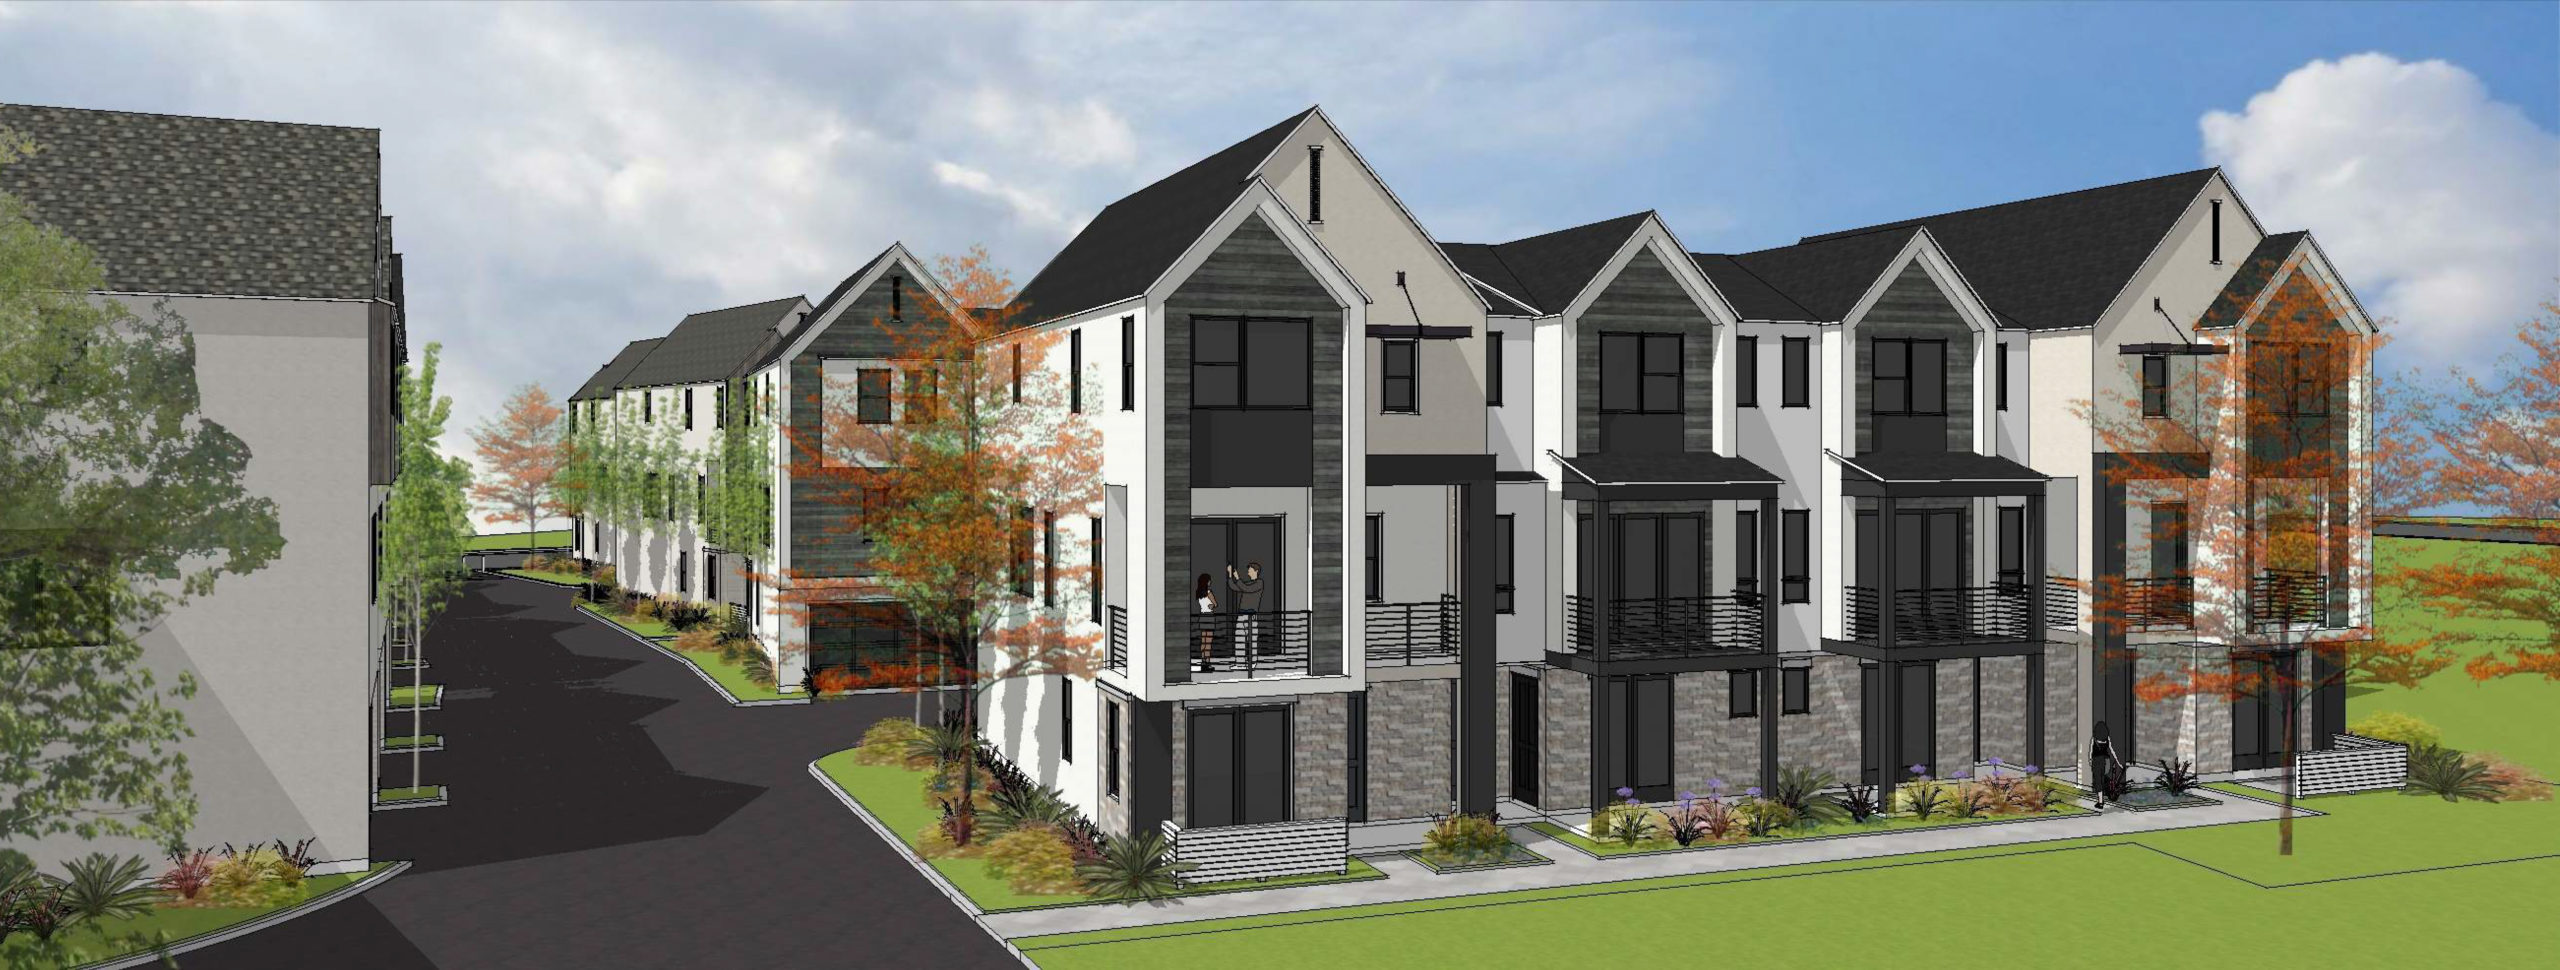 707 Commons Drive side view, rendering by BSB Design